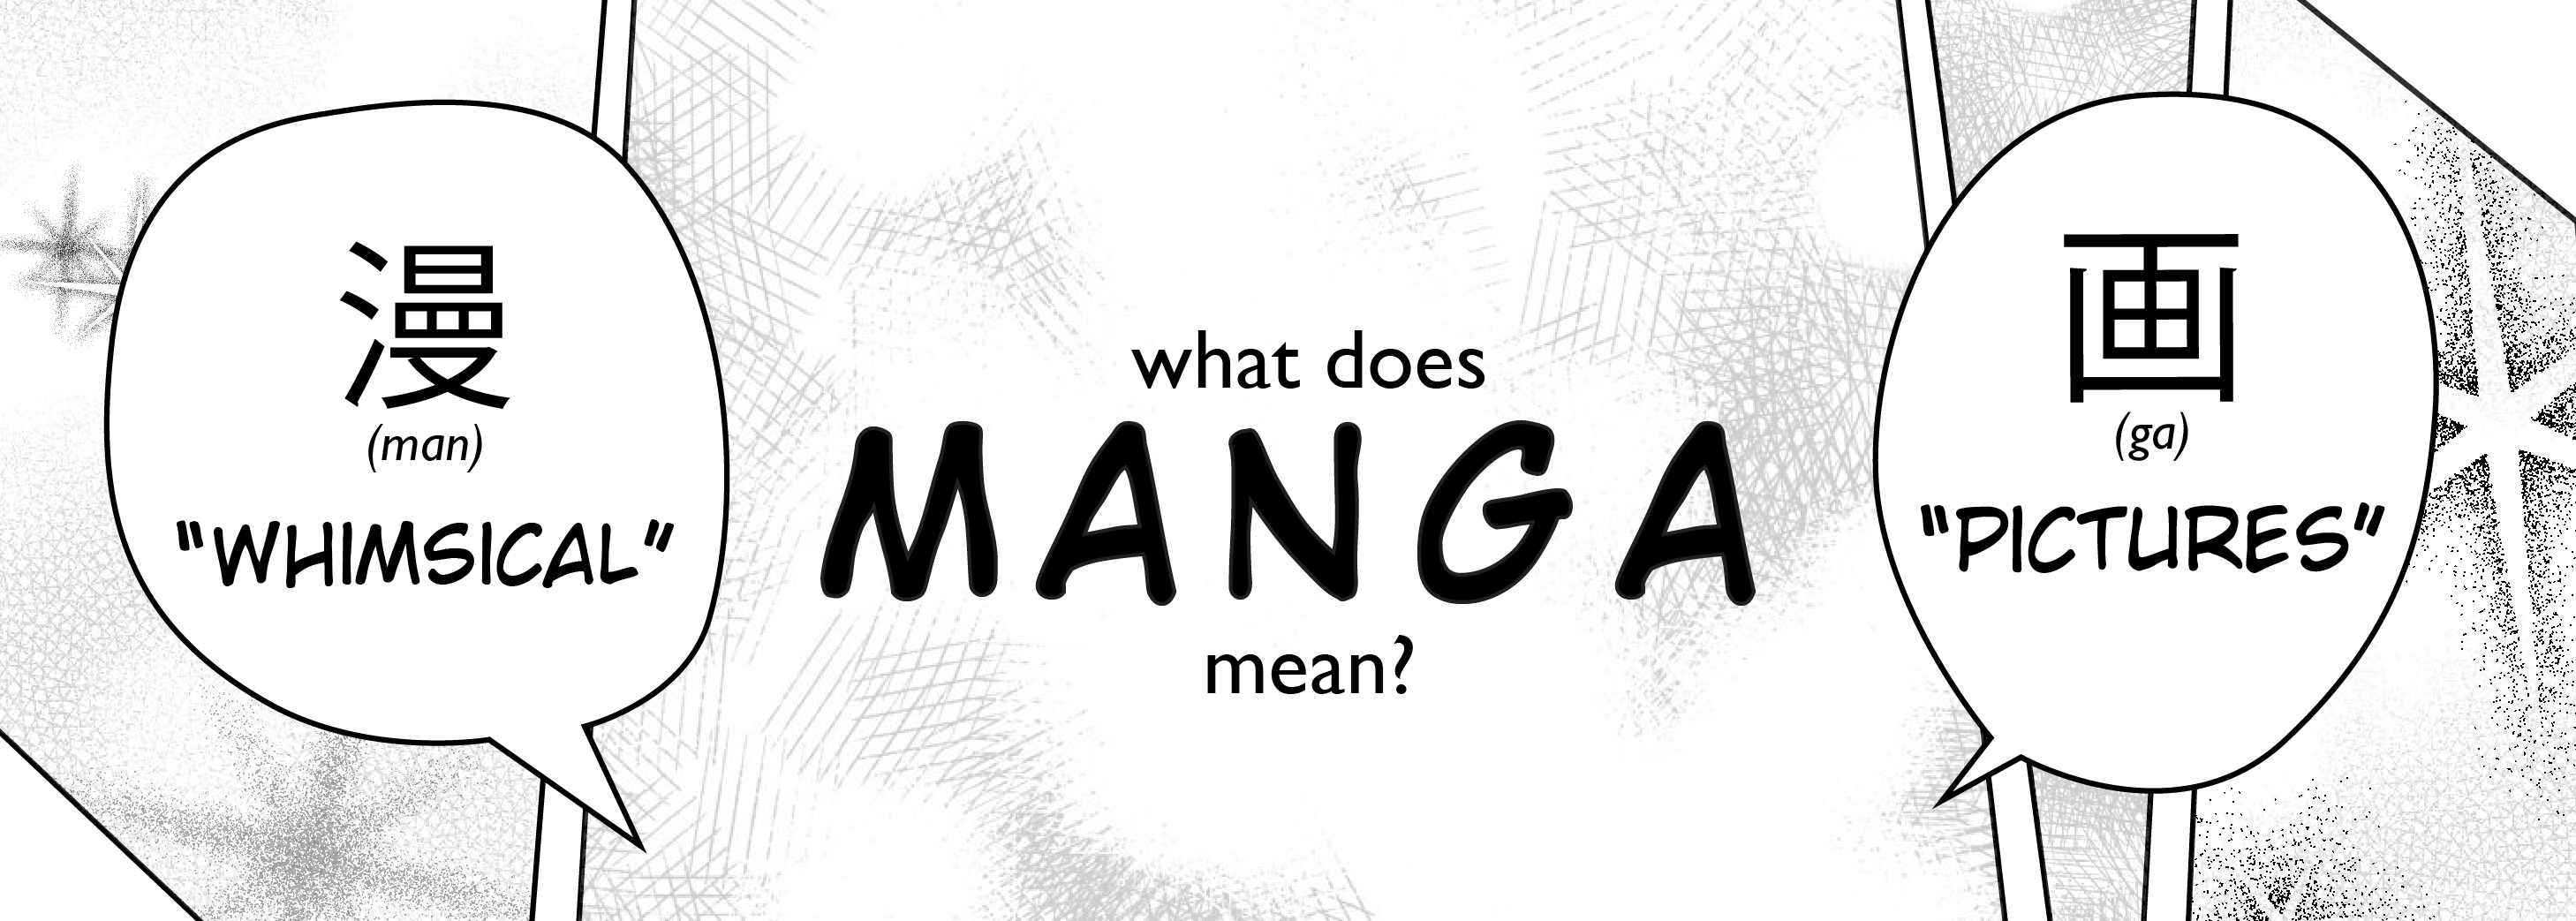 Definition of Manga. Man means whimsical while ga means pictures.